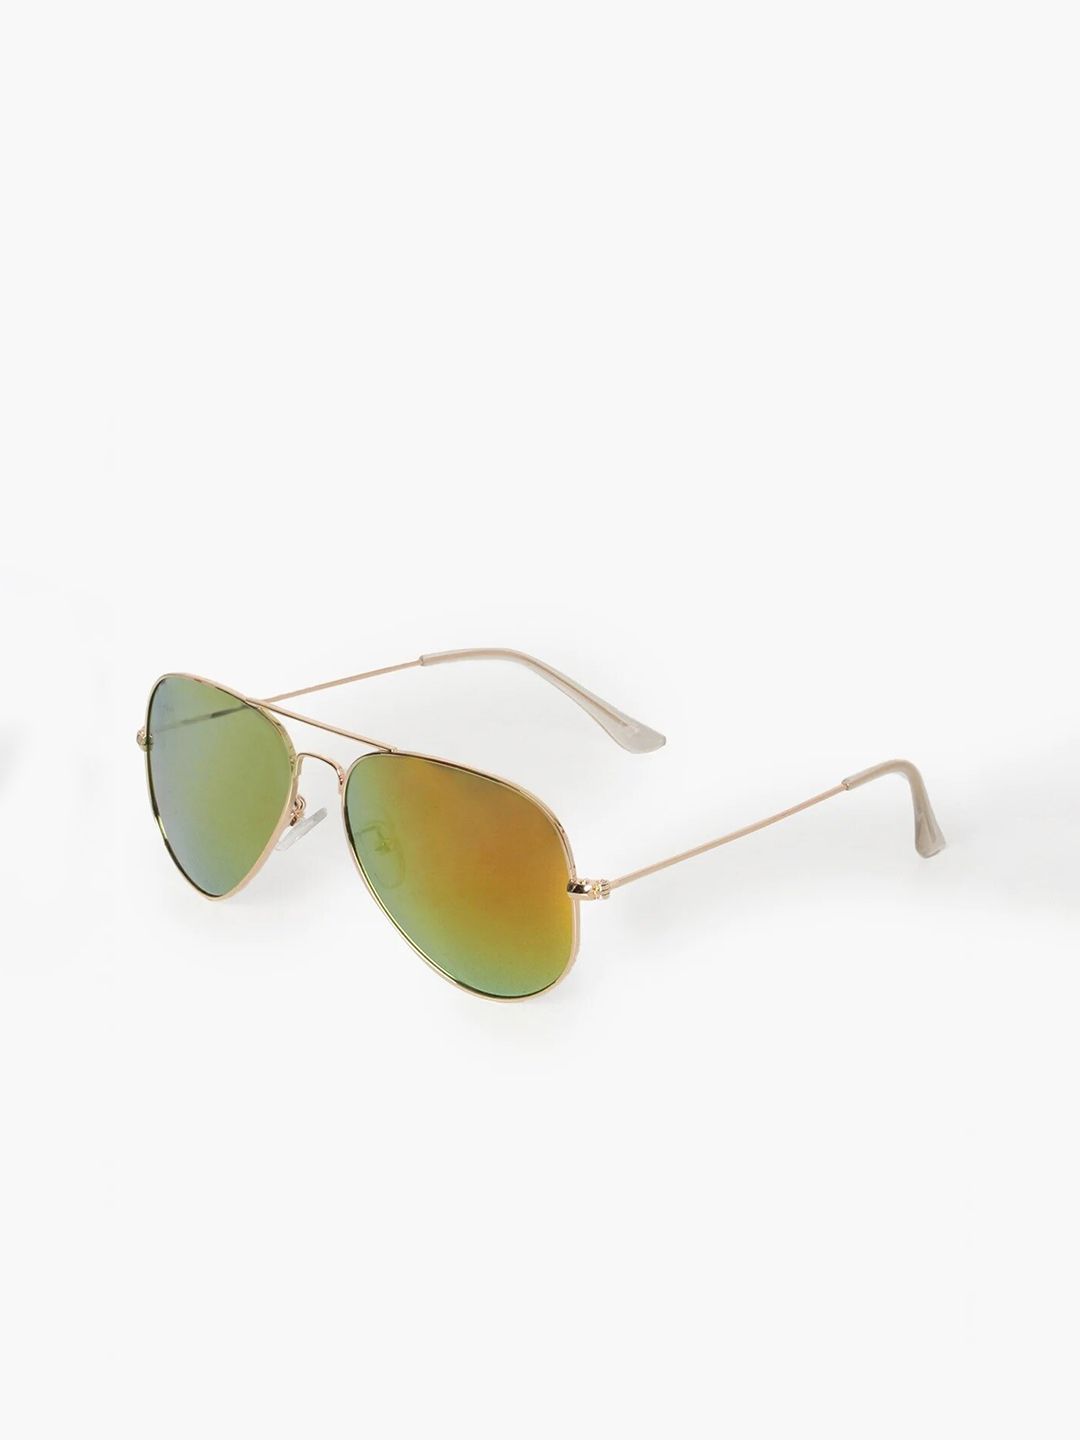 MTV Unisex Gold Lens & Gold-Toned Aviator Sunglasses with UV Protected Lens Price in India